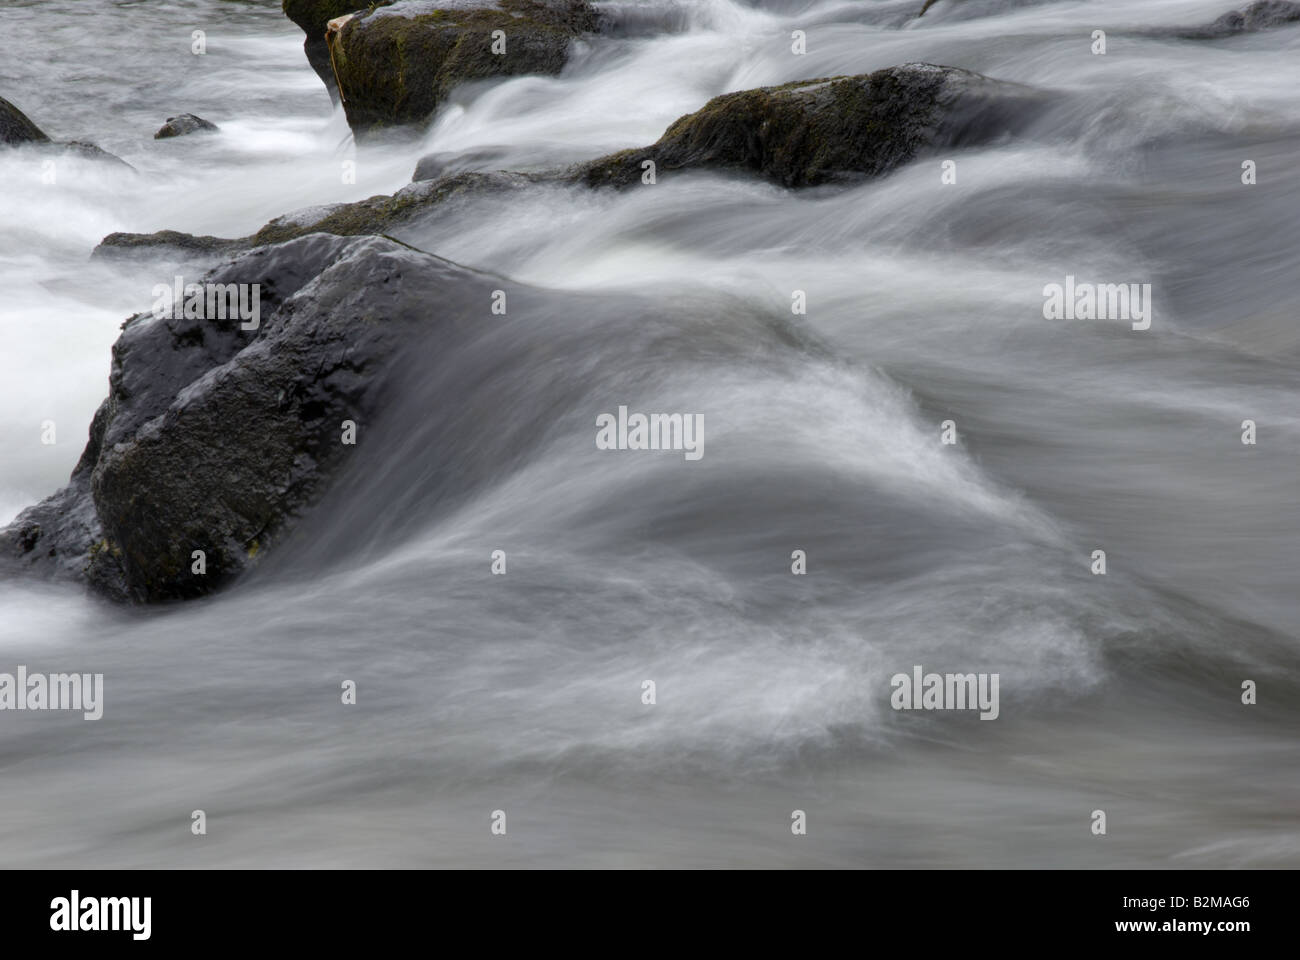 Fast Moving River Water flowing over stones in a series of rapids Stock Photo